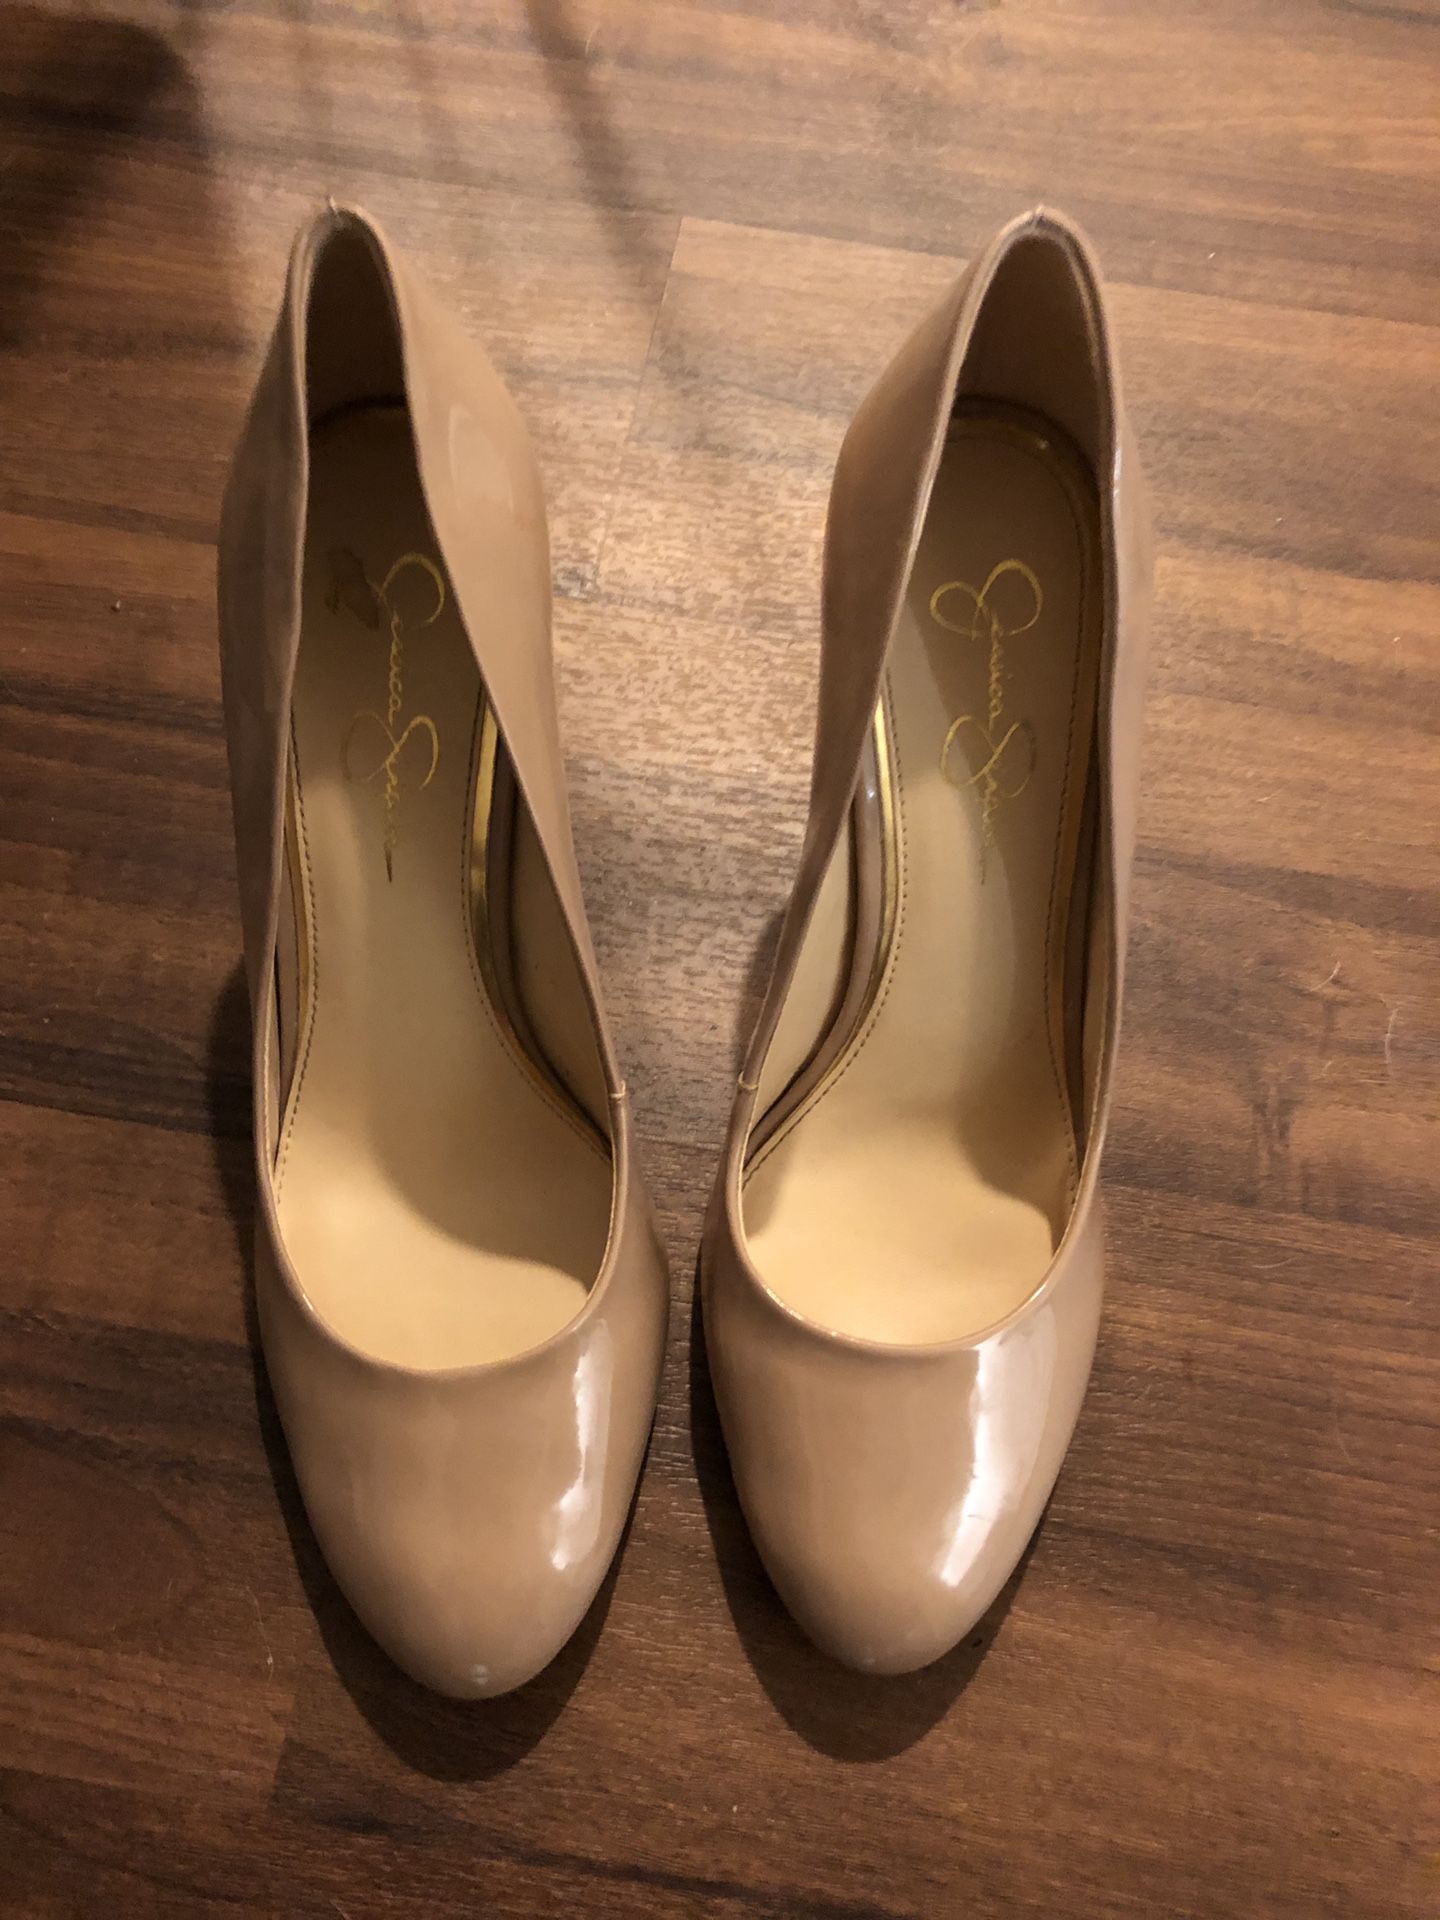 Nude patent leather heels